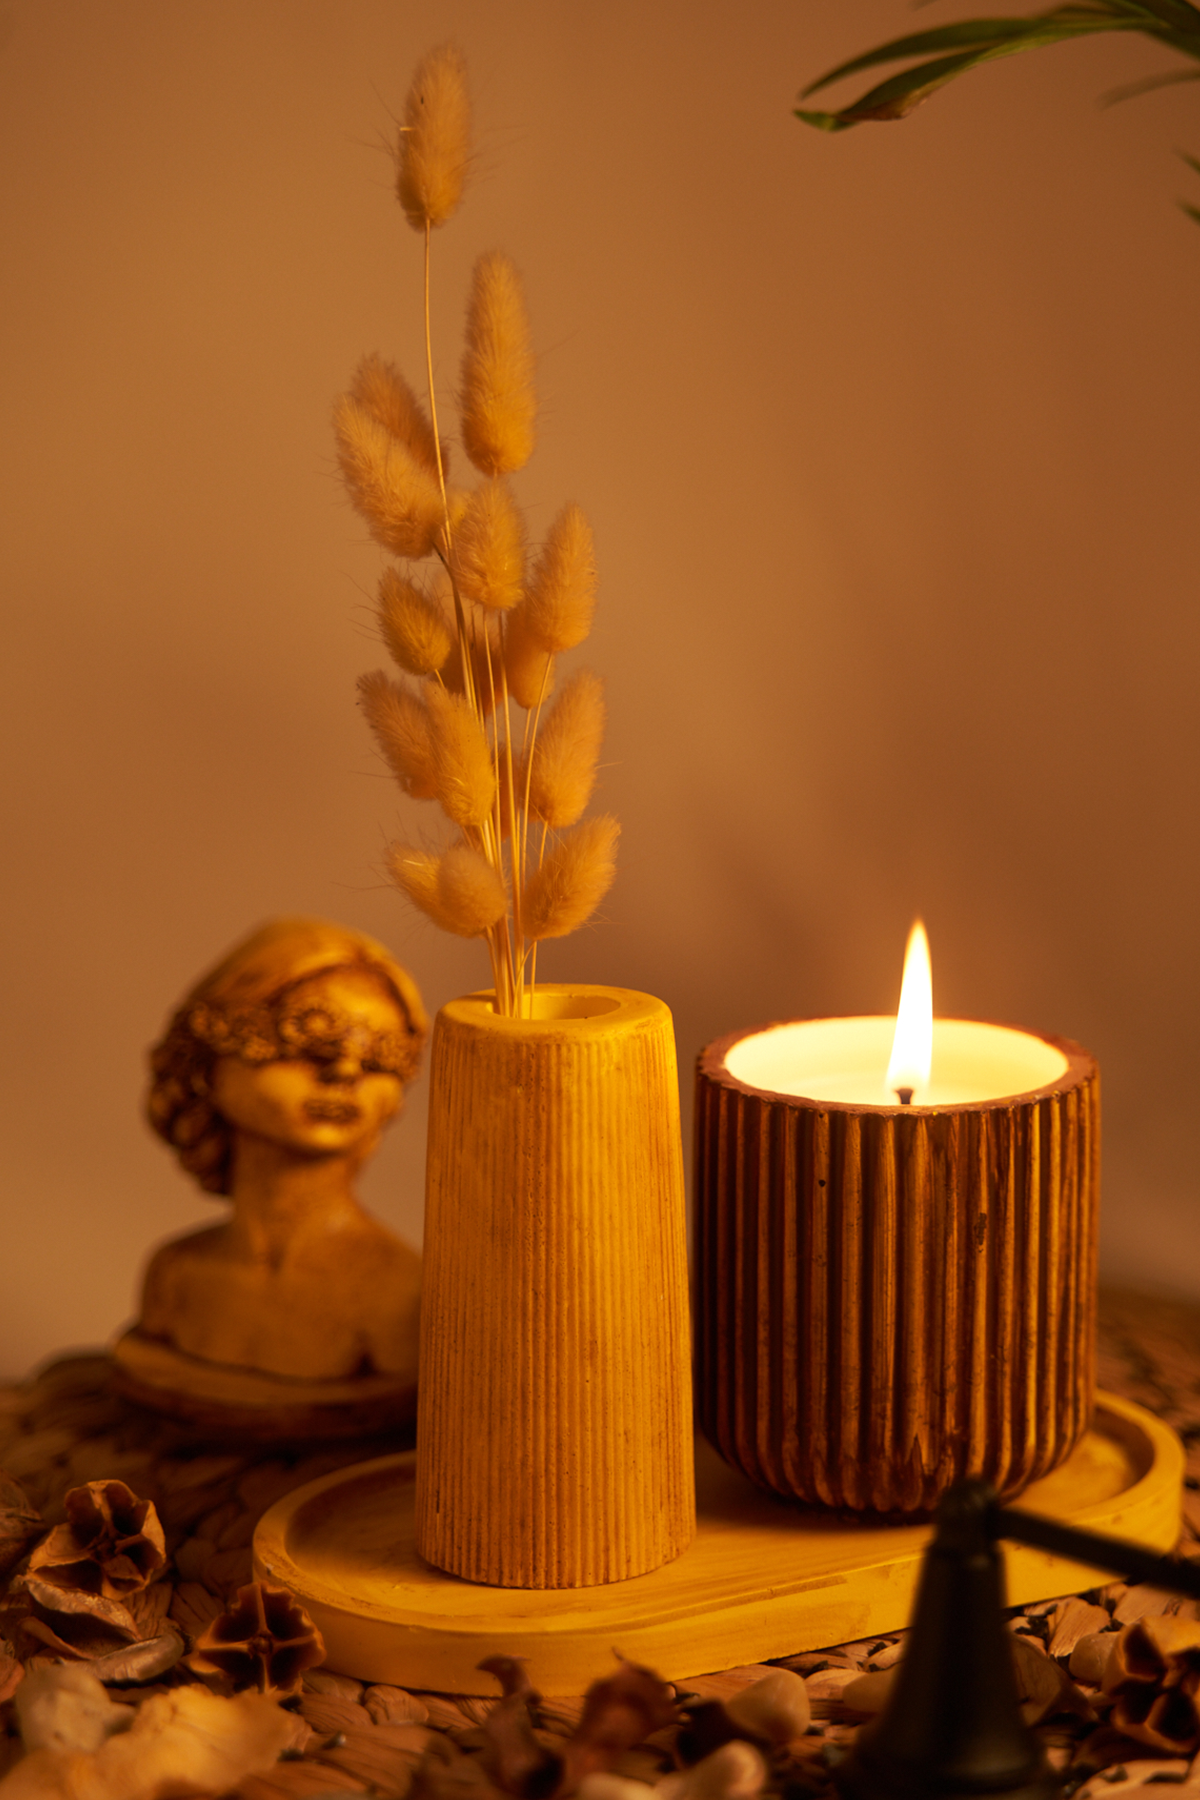 Indulge in Tranquility with our Decorative Scented Candle - Light Yellow - Marin Minerals